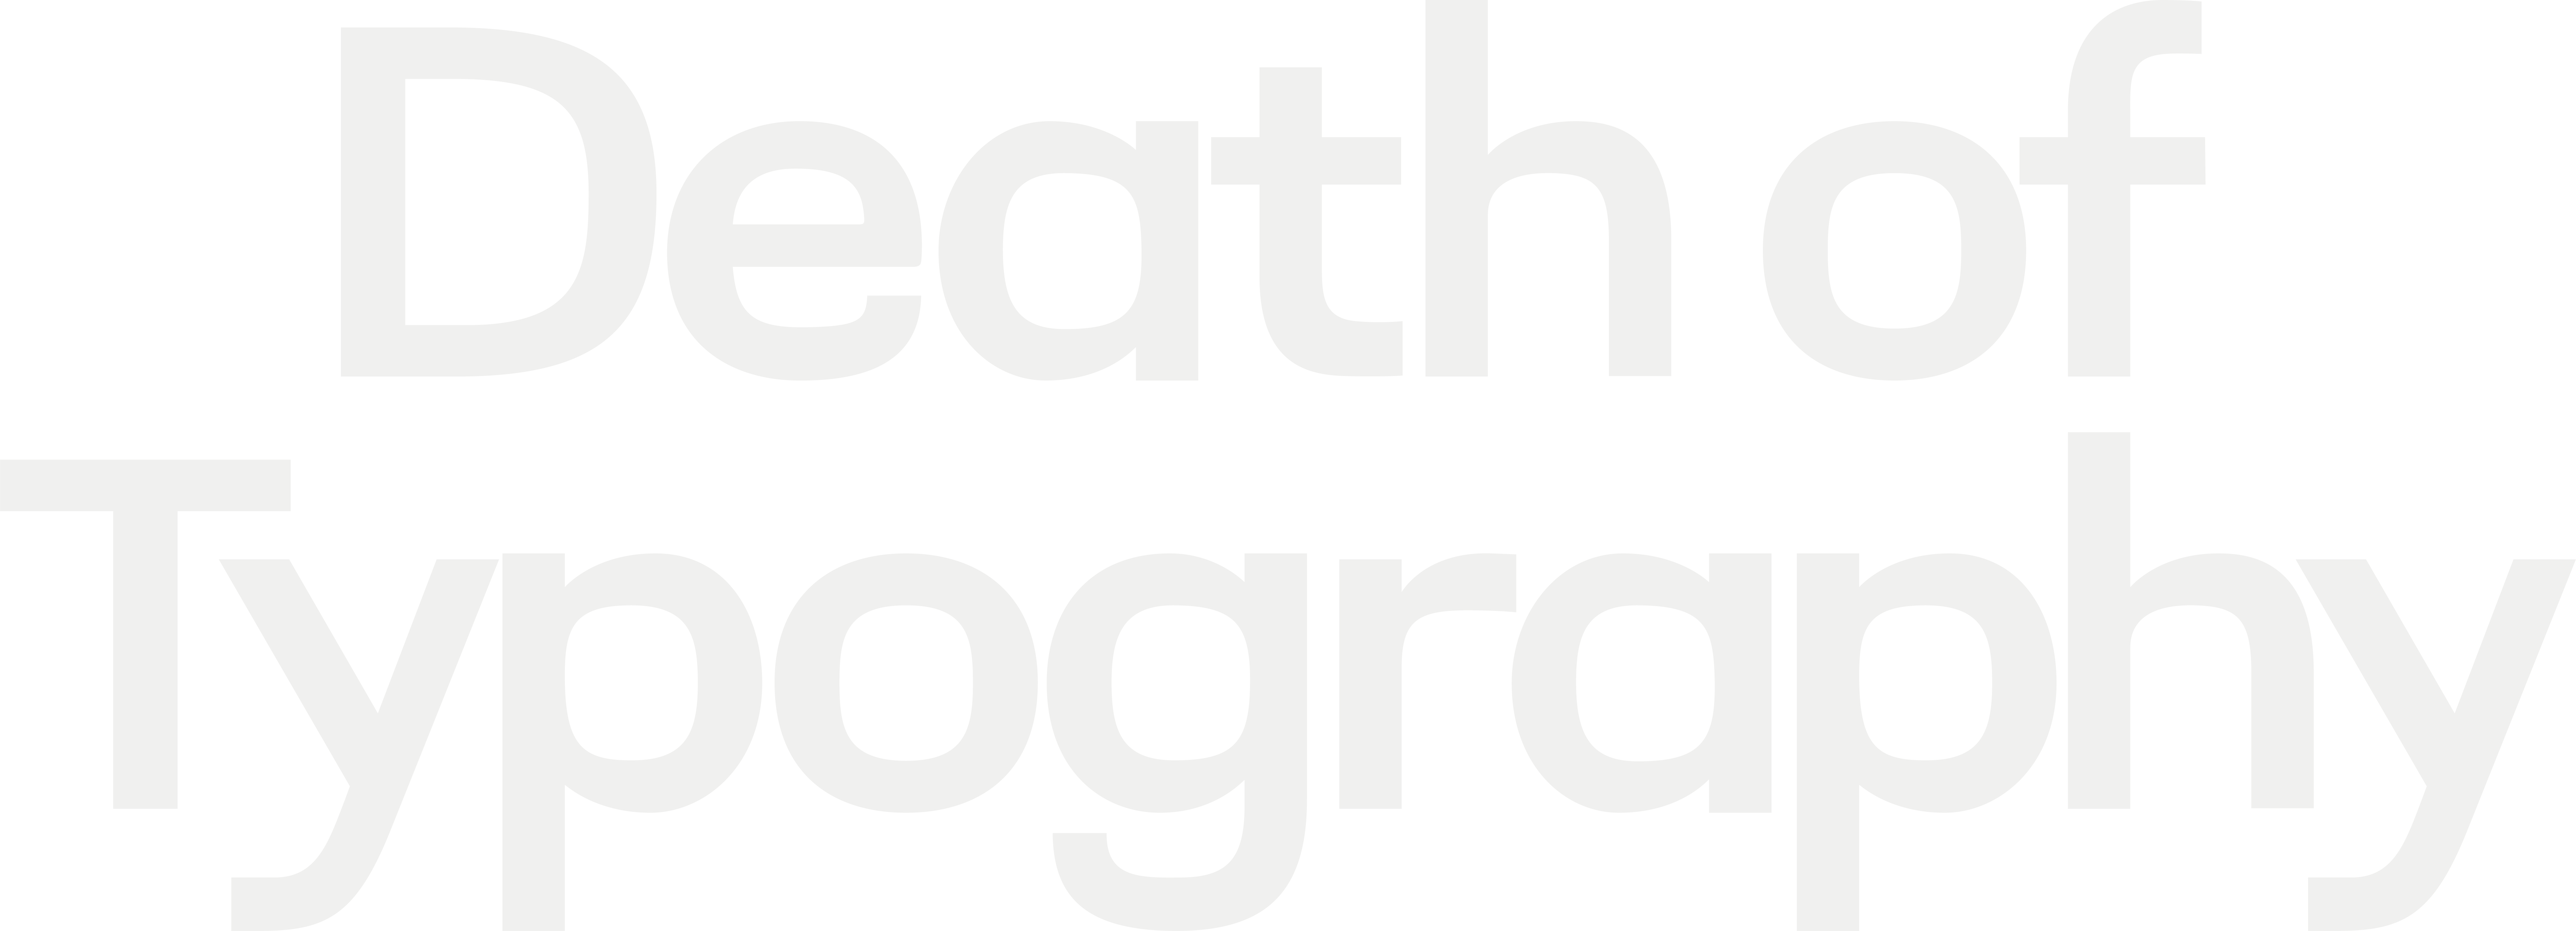 Death of Typography